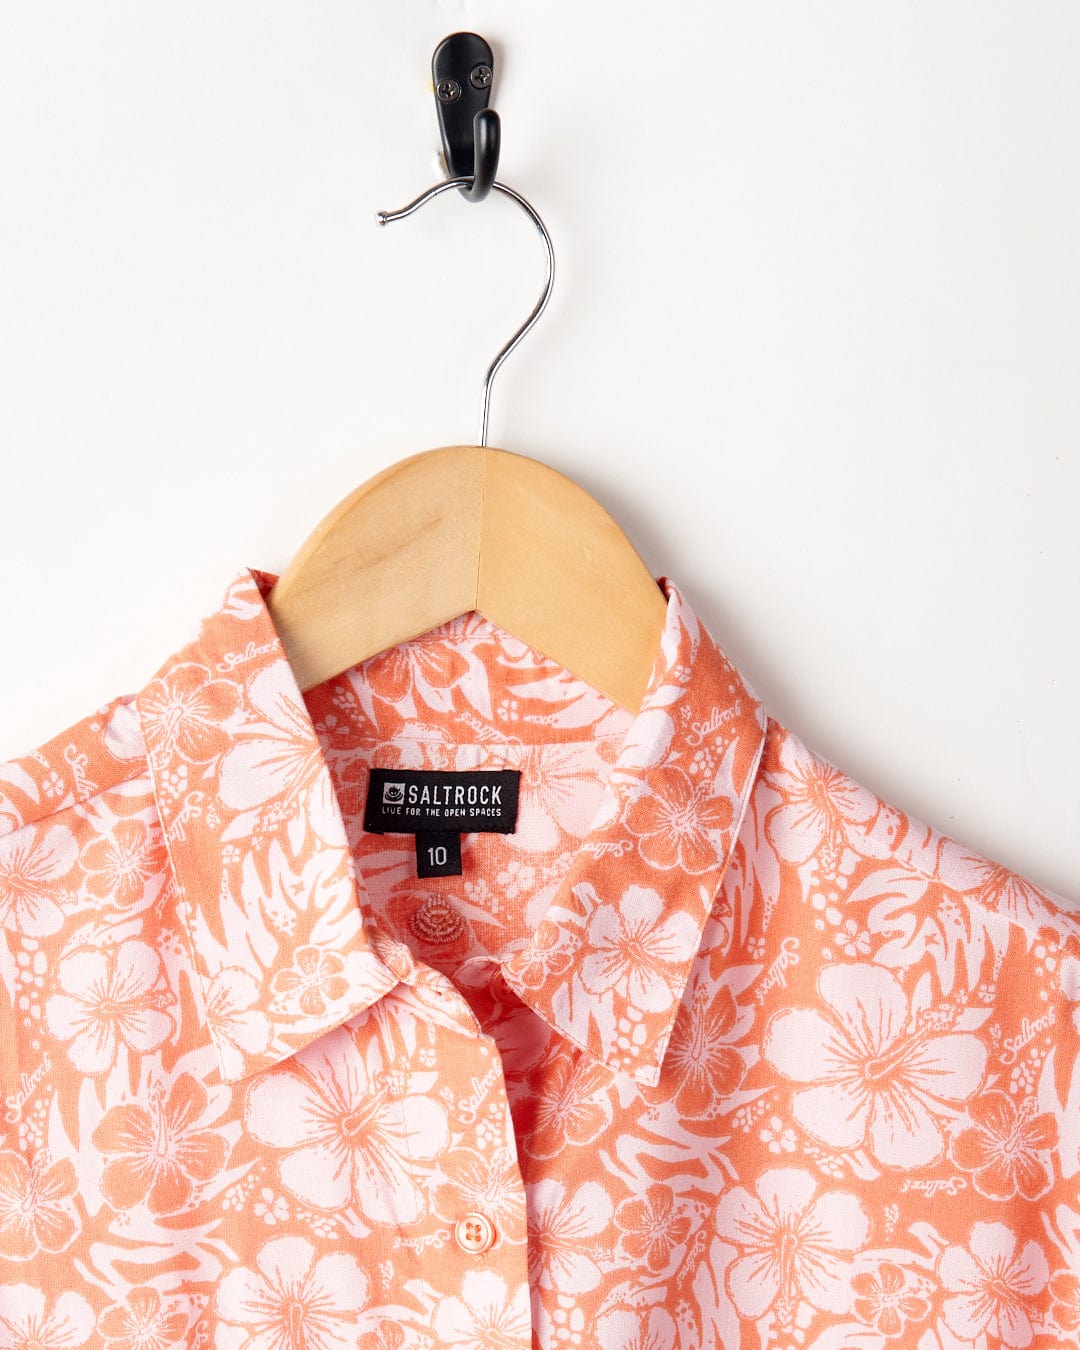 Saltrock's Hibiscus - Womens Tie Front Shirt in Orange on a wooden hanger against a white background.